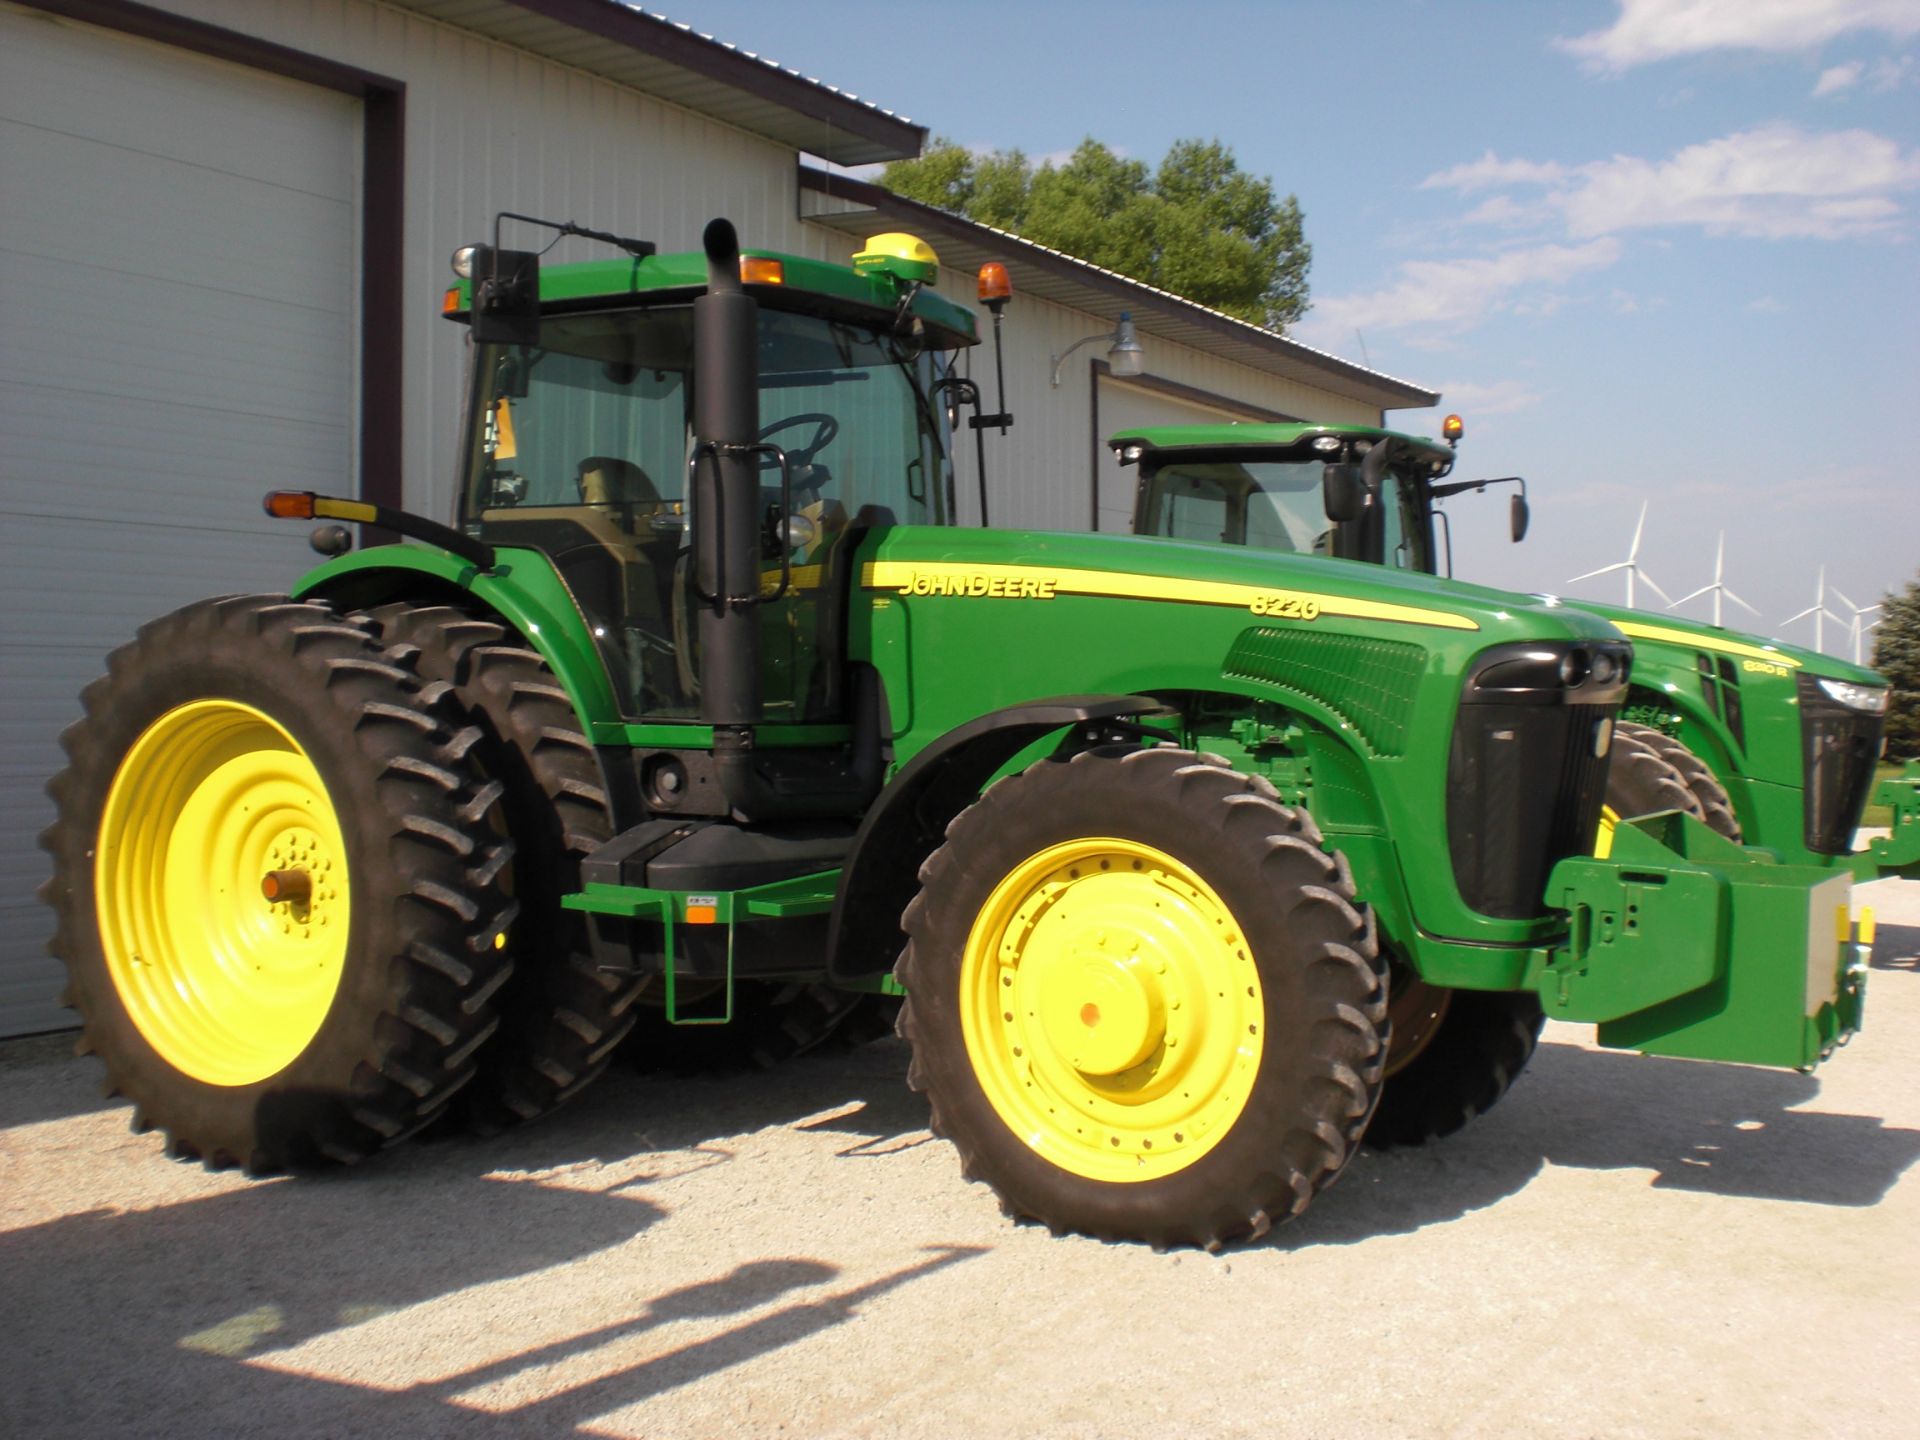 2005 JD 8220 MFWD Green Star ready 480/80 50” duals, 8 front weights, 4 inner weights, quick